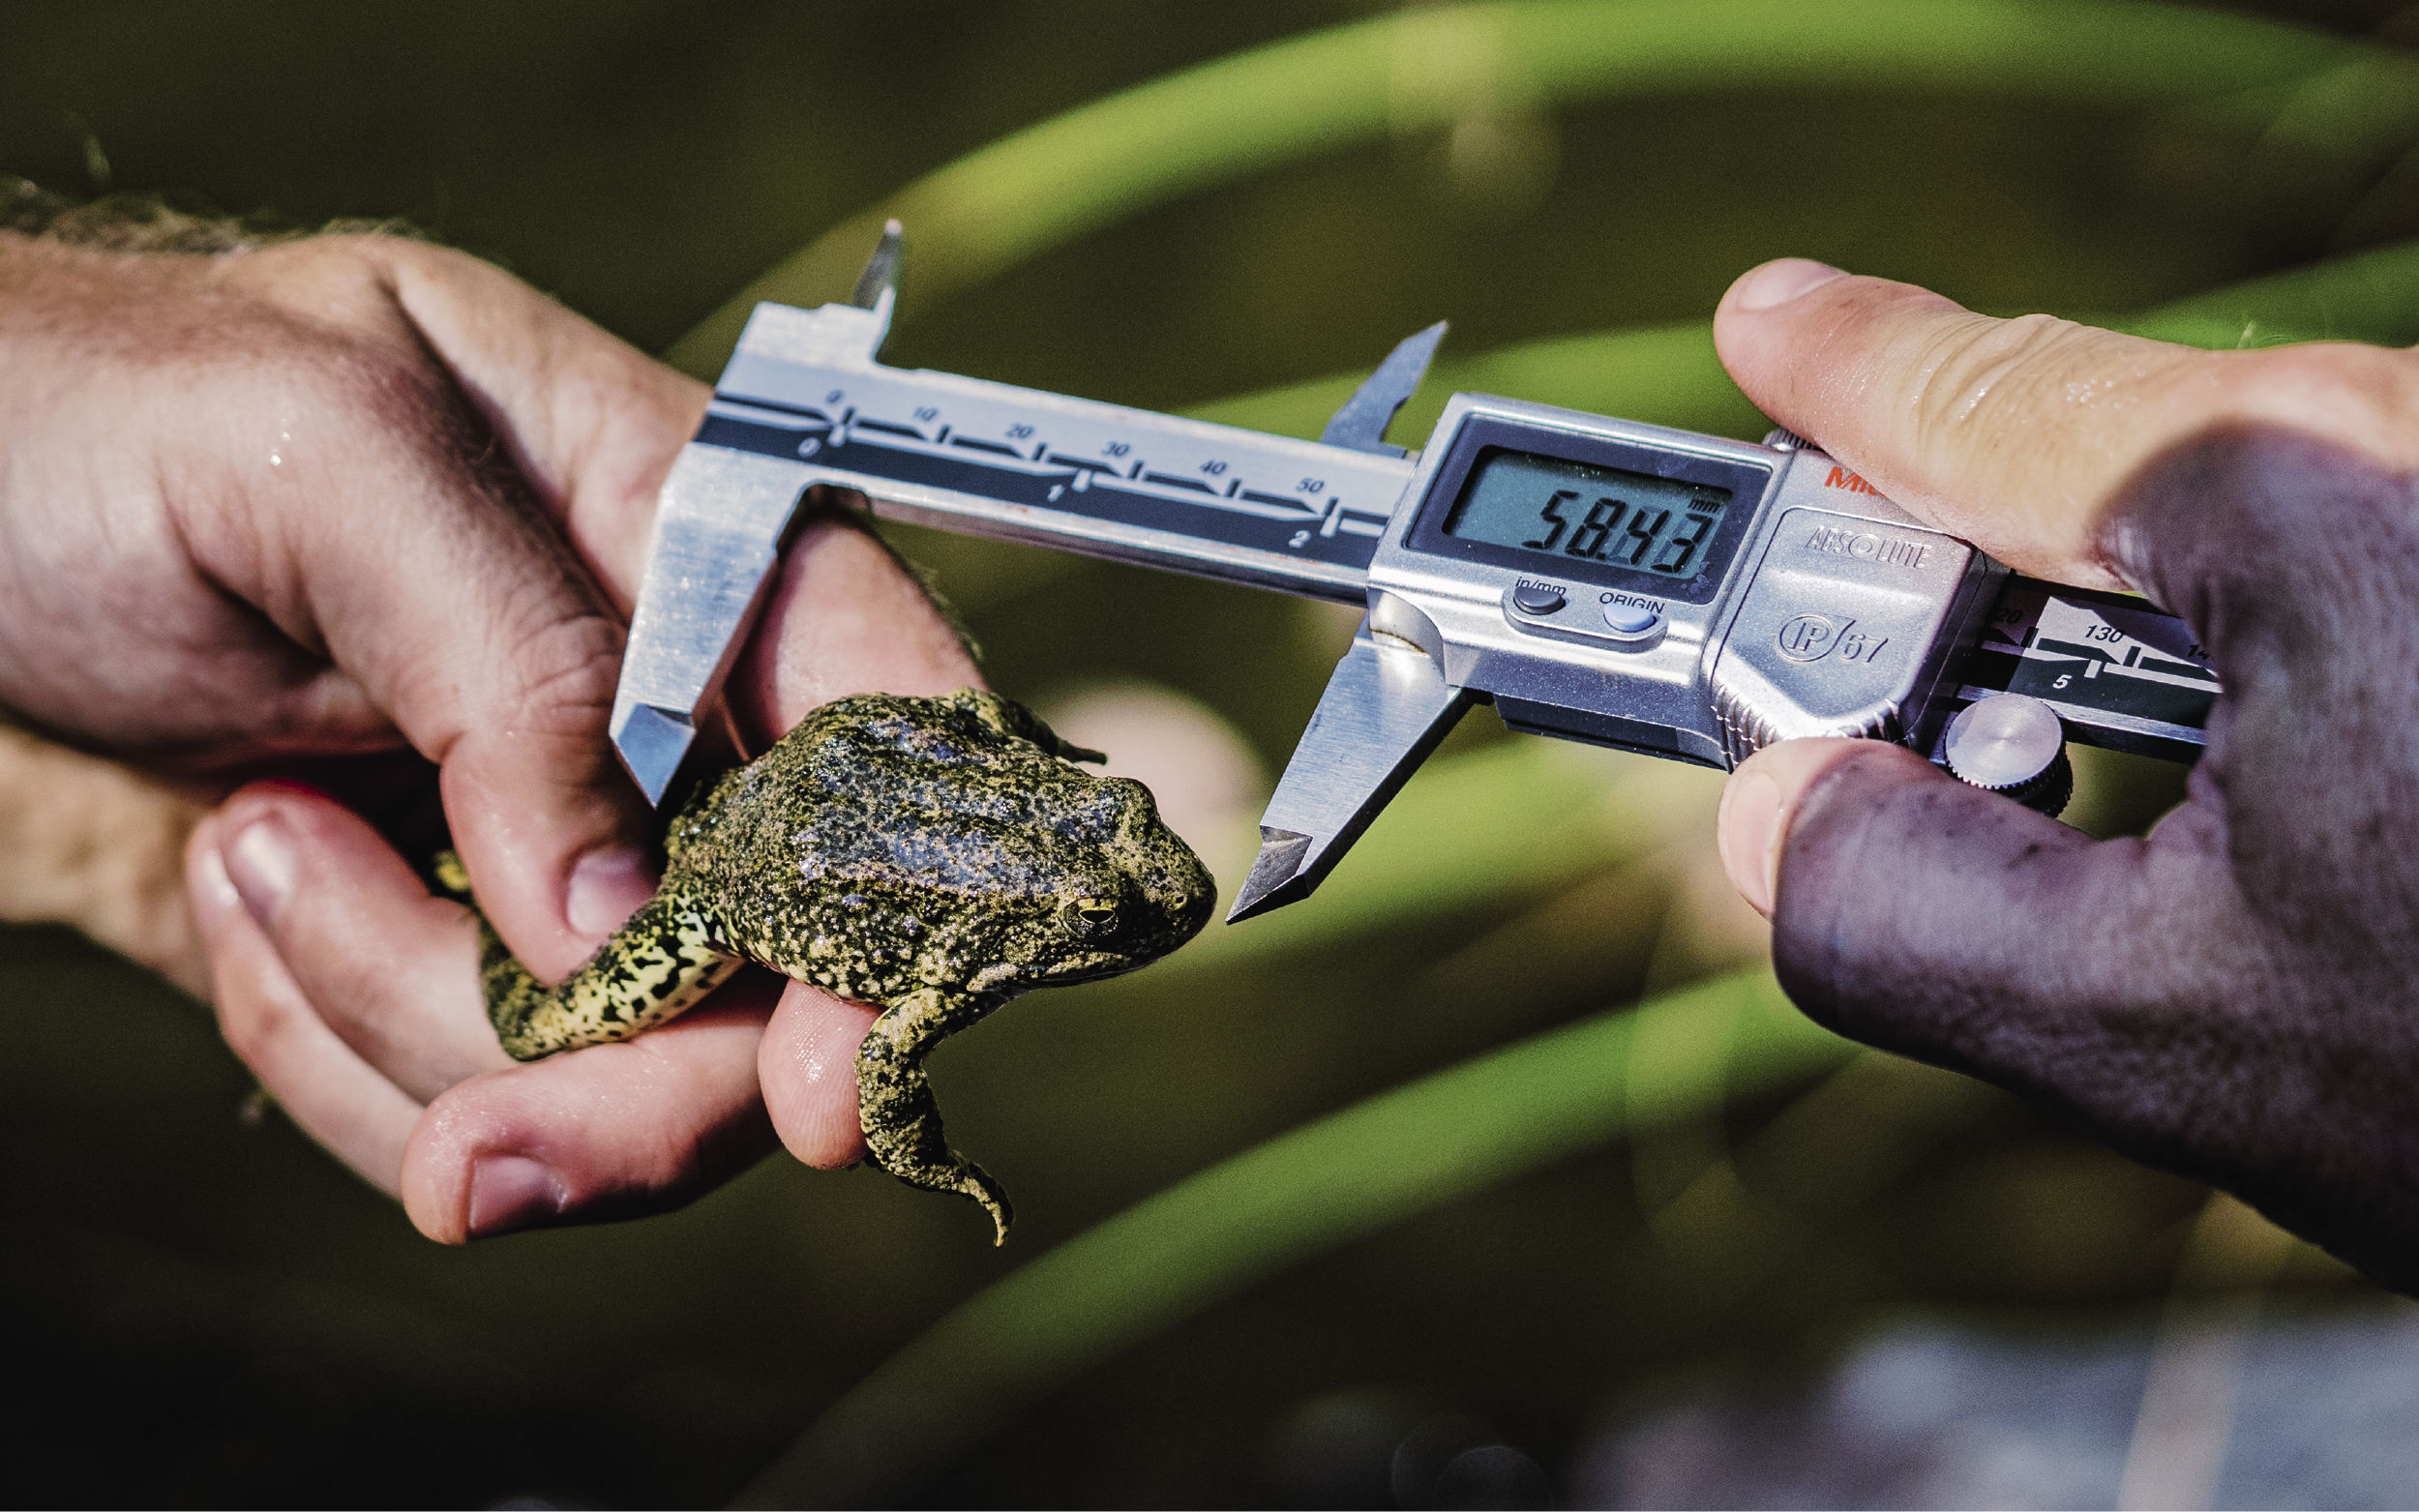 Close-up of a frog next to a measuring device that reads 5843.